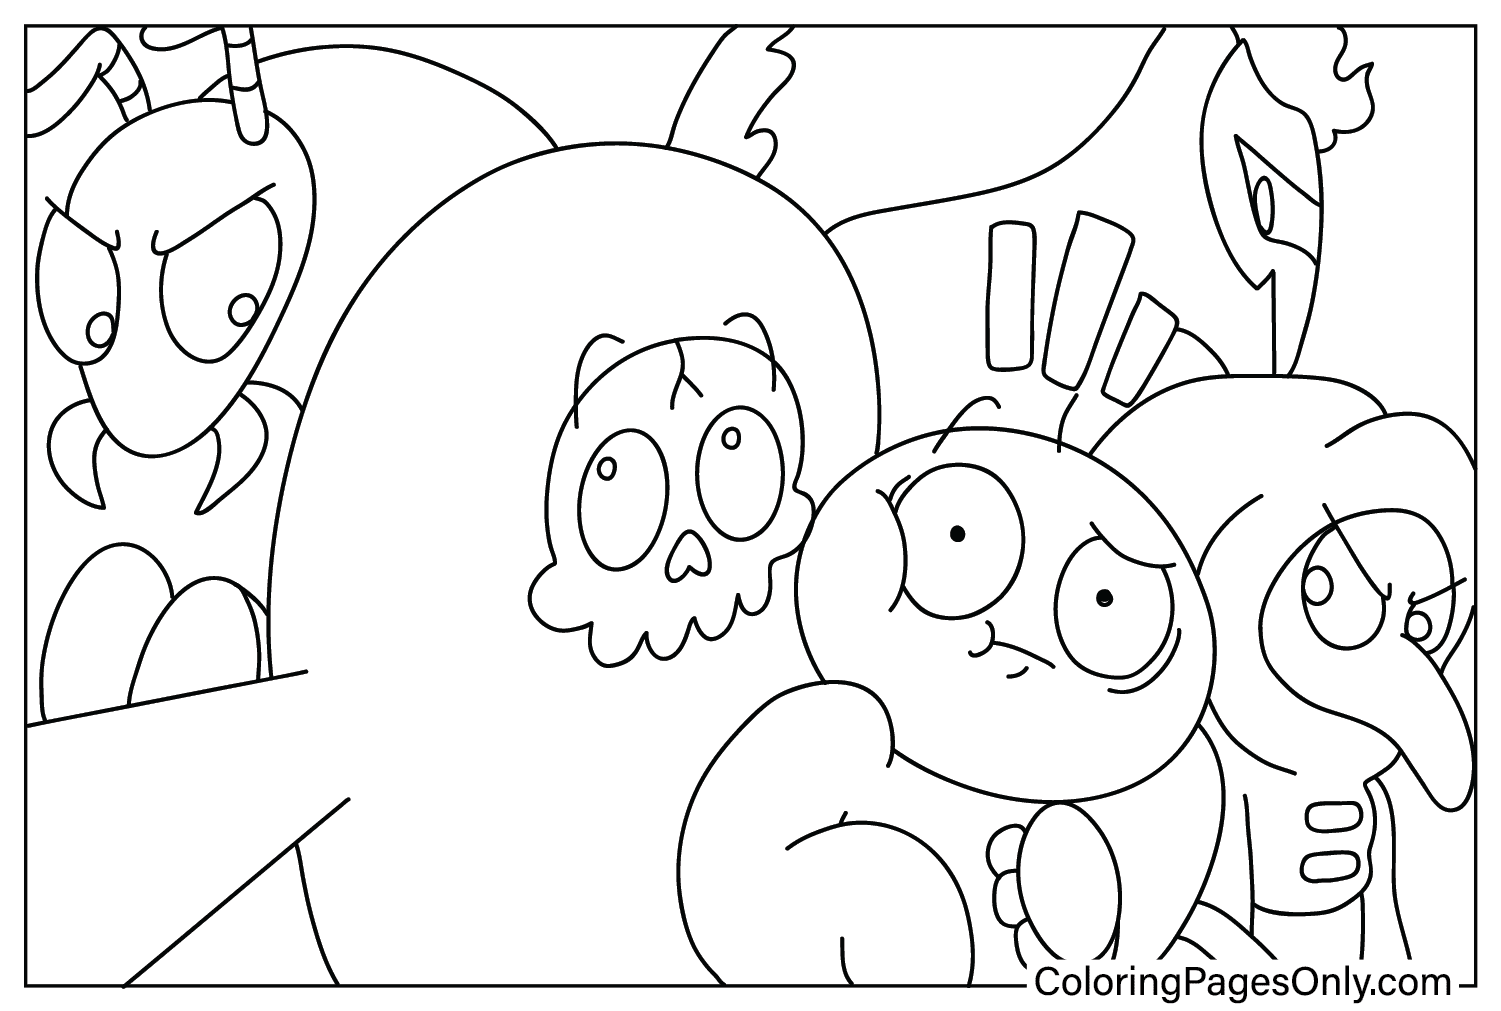 Coloring Sheet TheOdd1sOut - Free Printable Coloring Pages